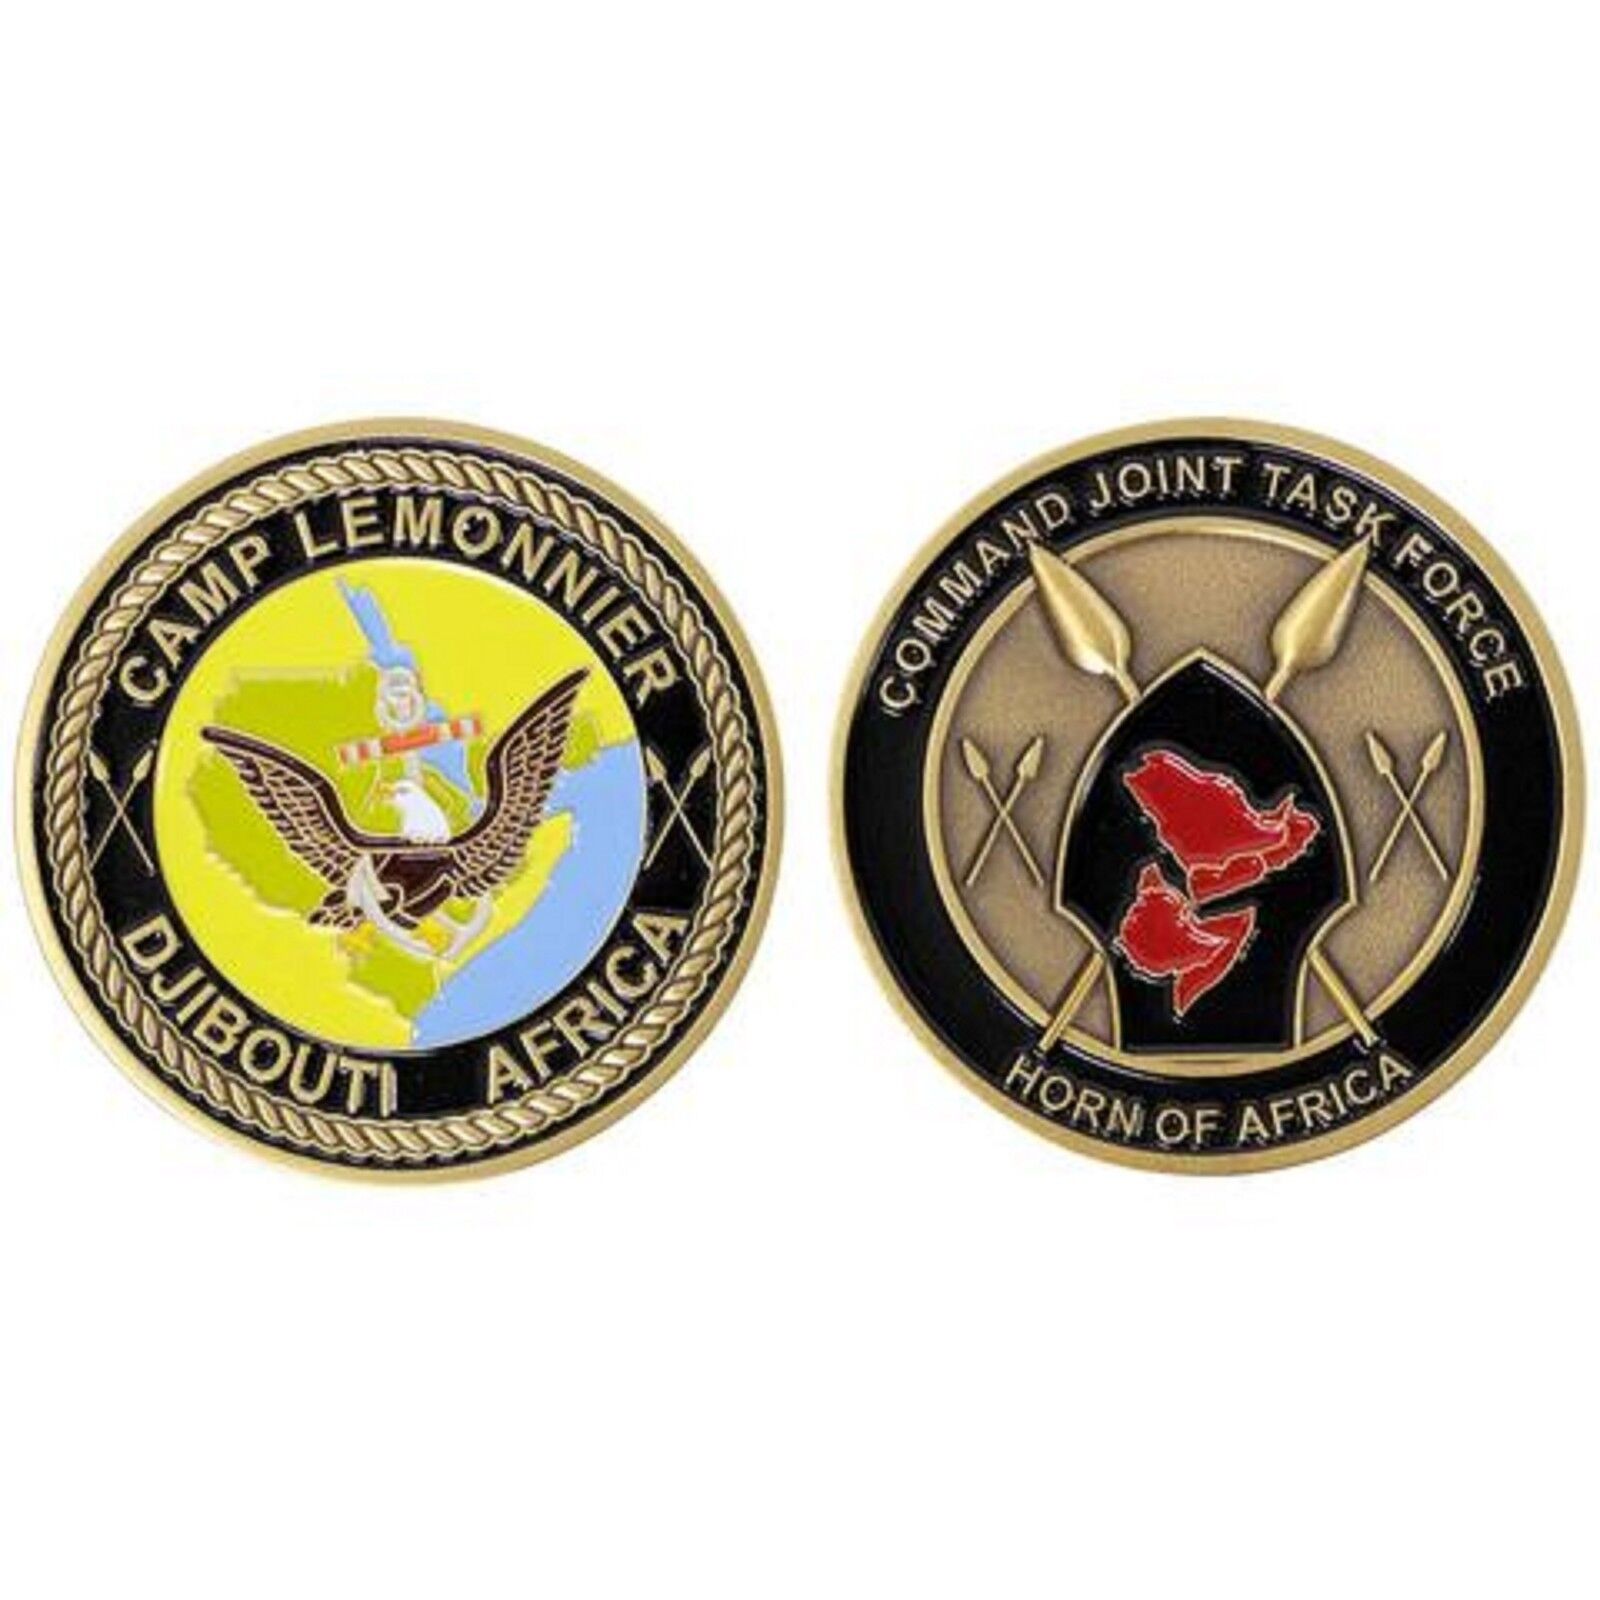 DJIBOUTI HORN OF AFRICA COMBINED JOINT TASK FORCE CAMP LEMONNIER CHALLENGE COIN 